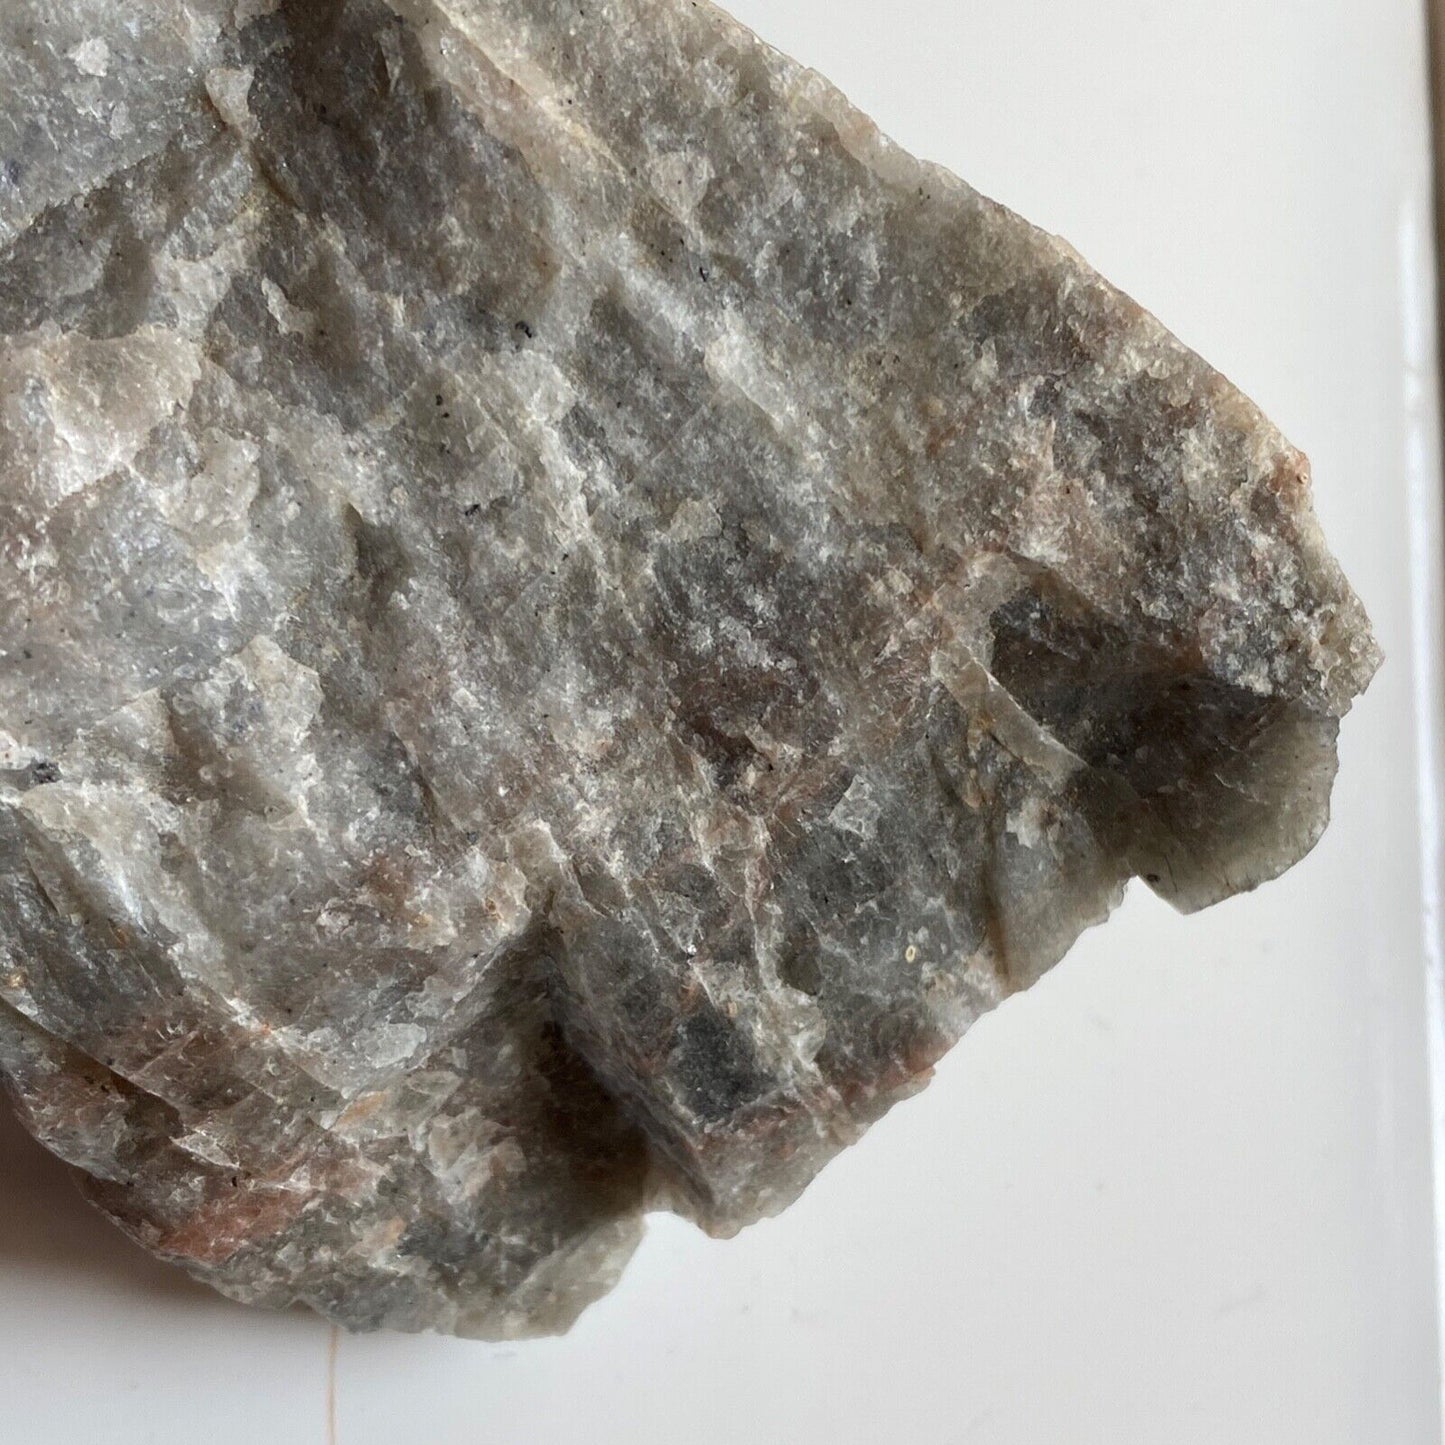 SCAPOLITE FROM OTTER LAKE, QUEBEC, CANADA LARGE 427g MF1195